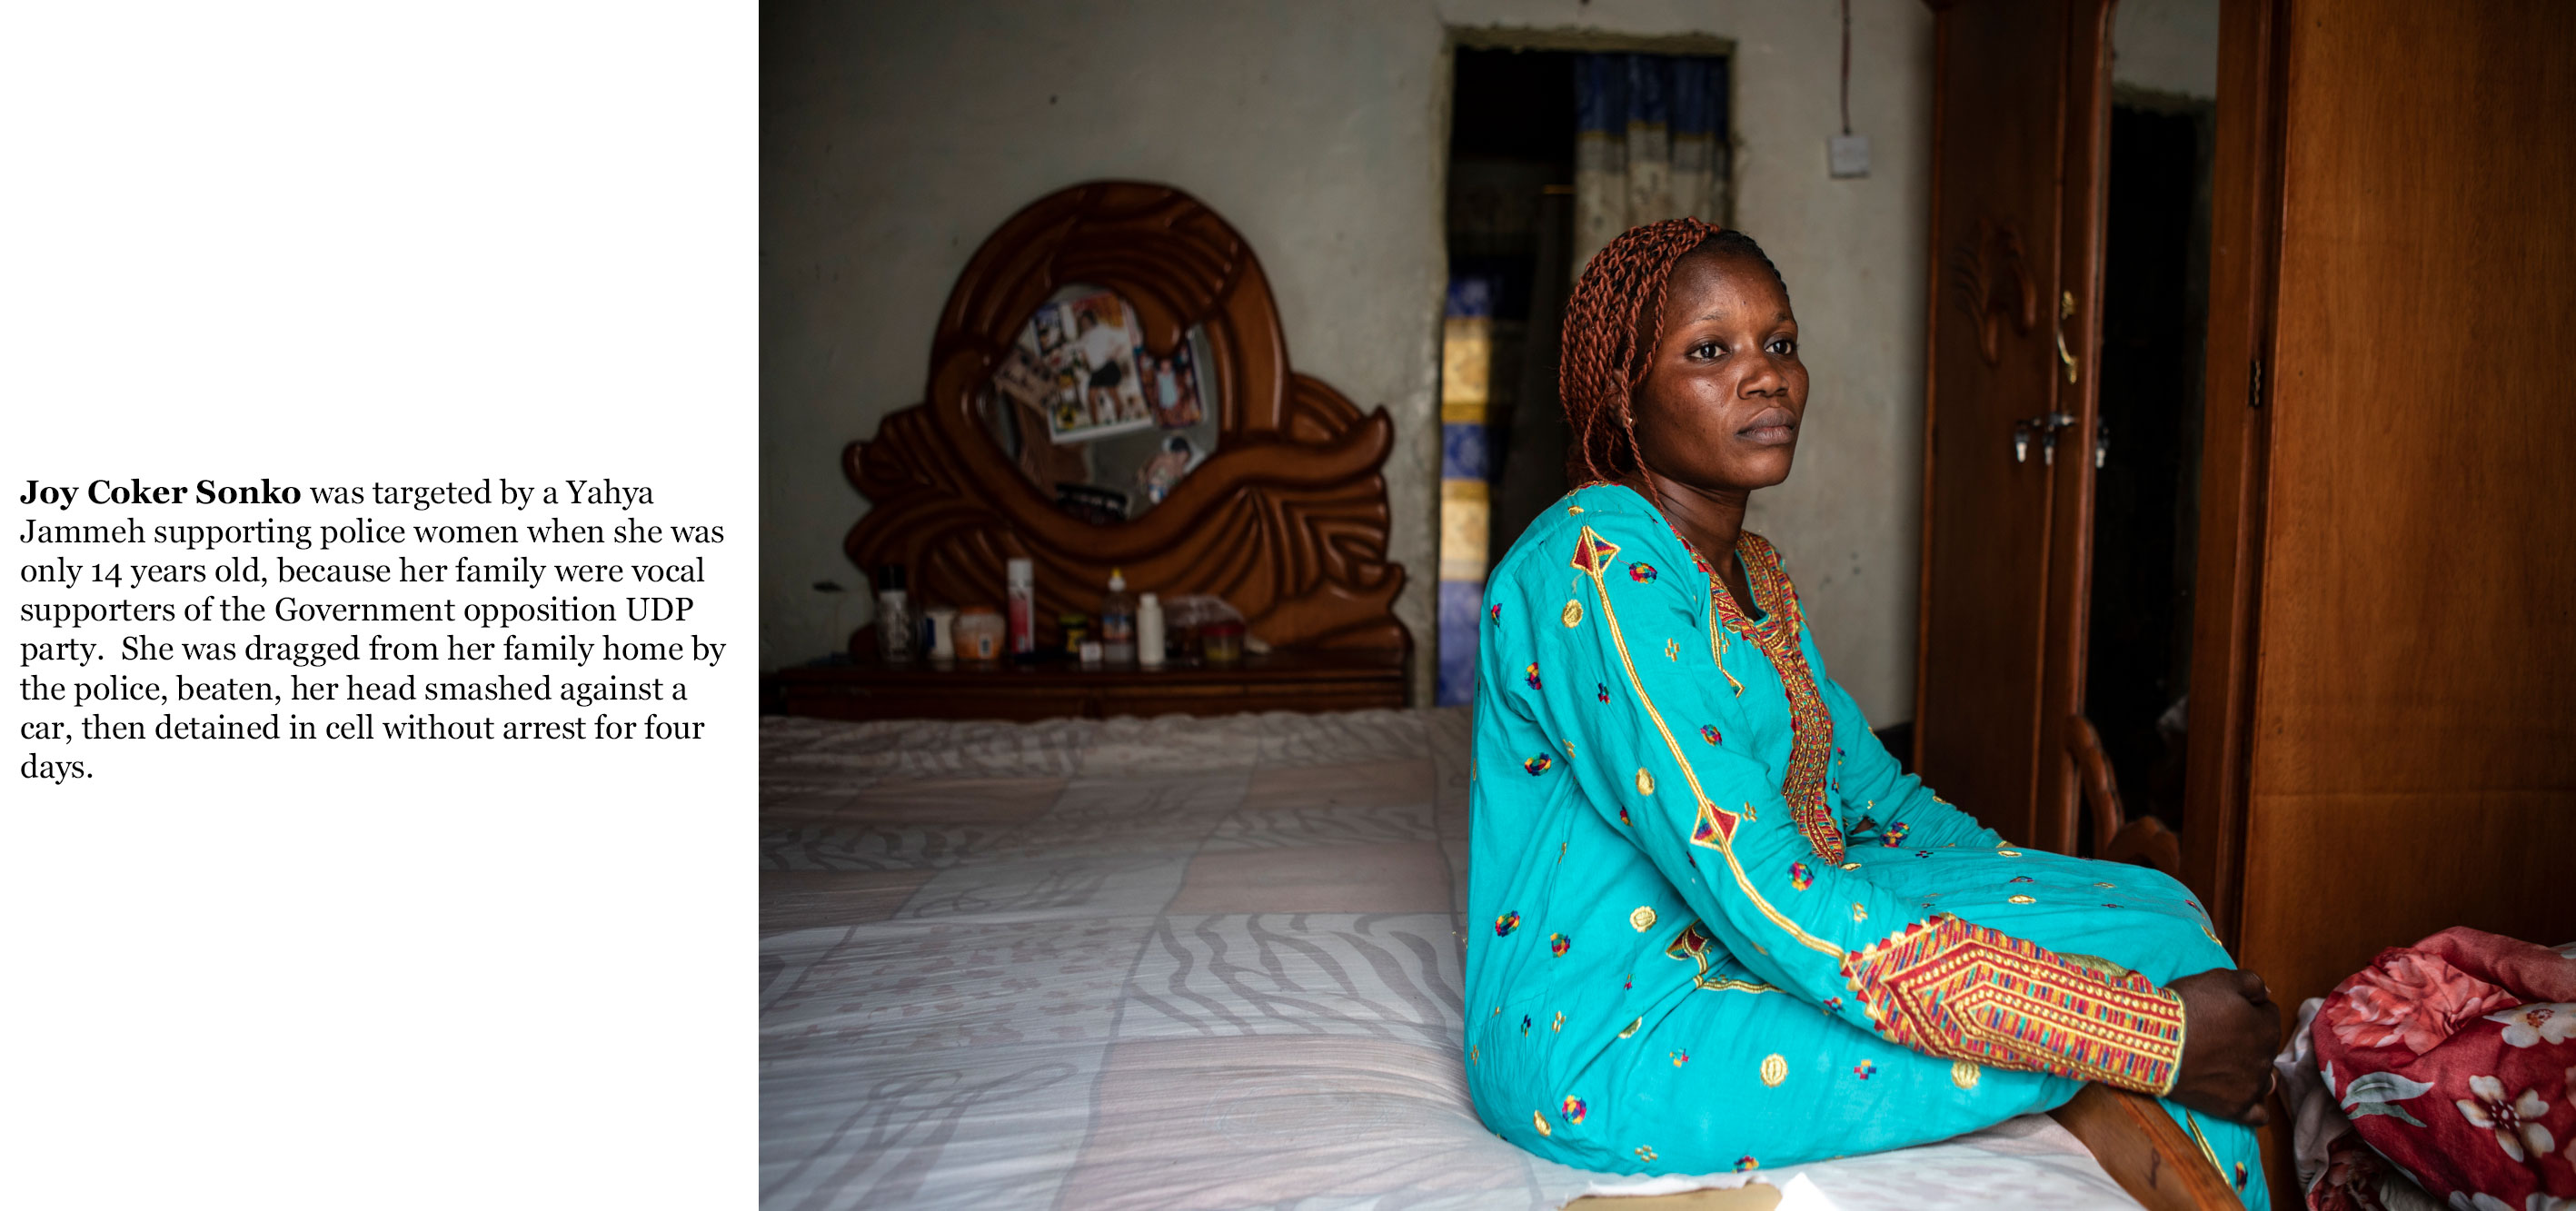 Gambia victims and resisters - Joy-Coker-Sonko beaten by police at 14 years old -1822_TEXT_web ©Jason Florio 